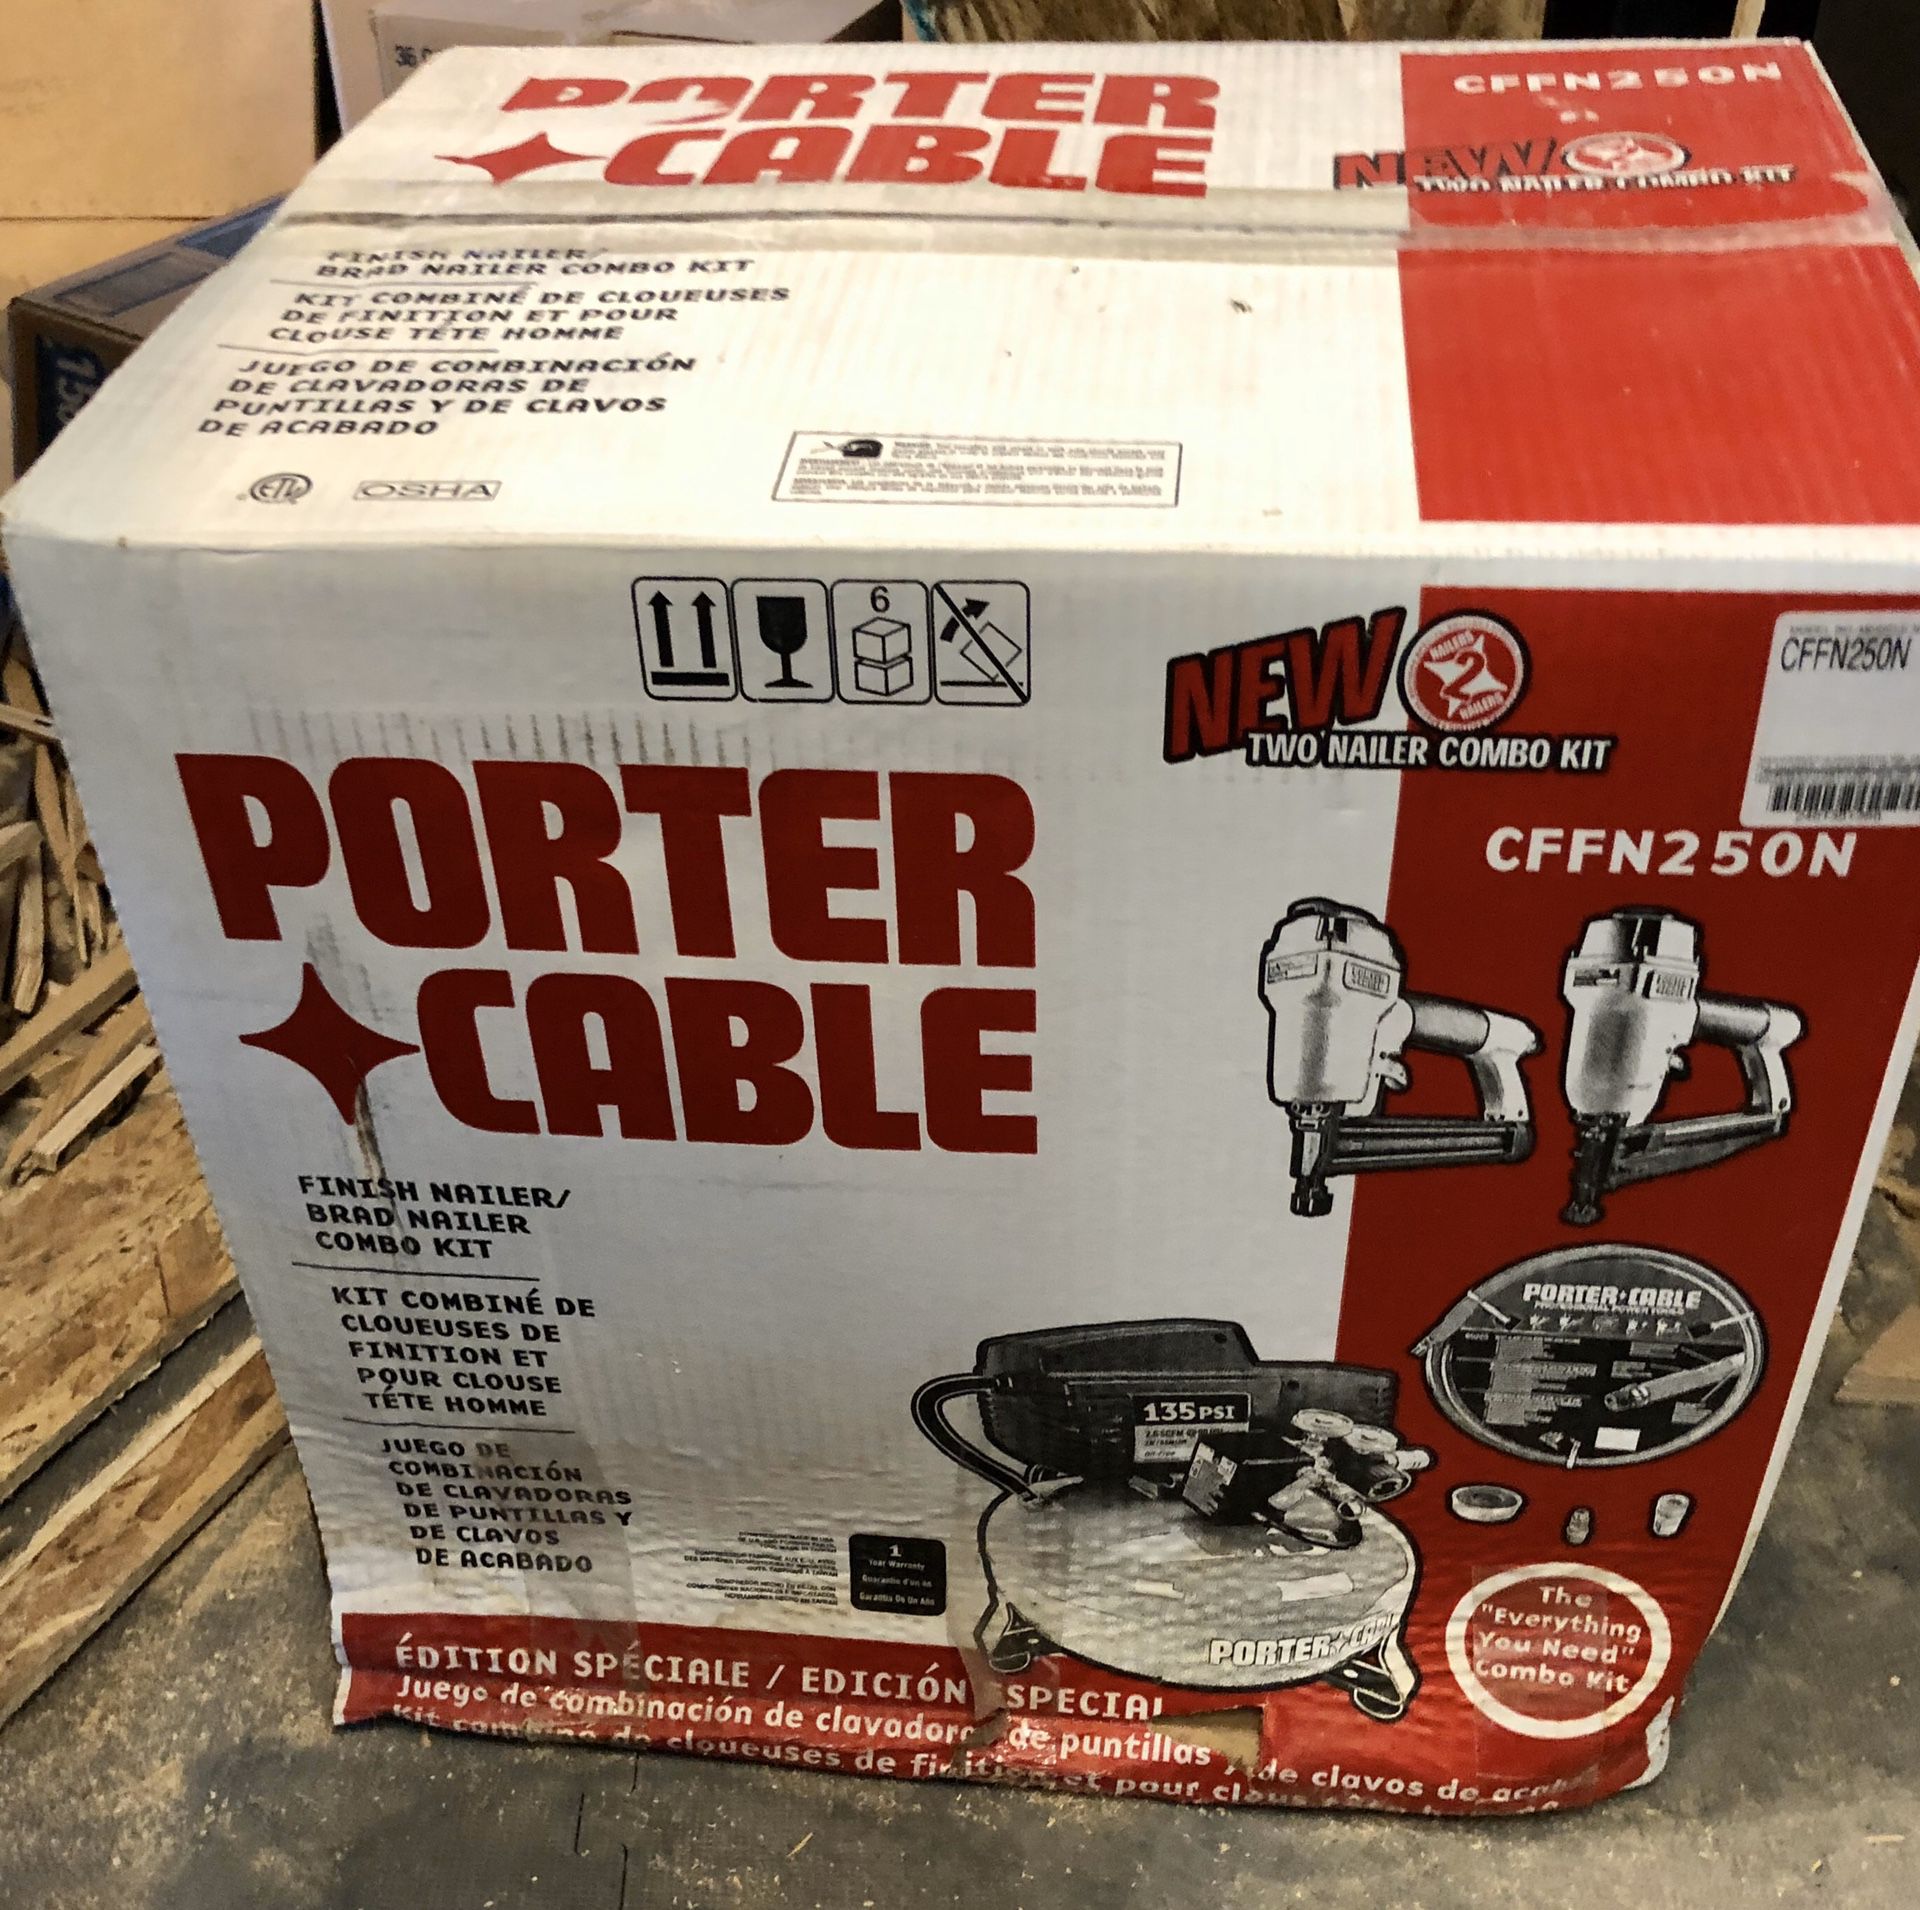 Porter cable 3-TOOL AND AIR COMPRESSOR COMBO KIT cffn250n